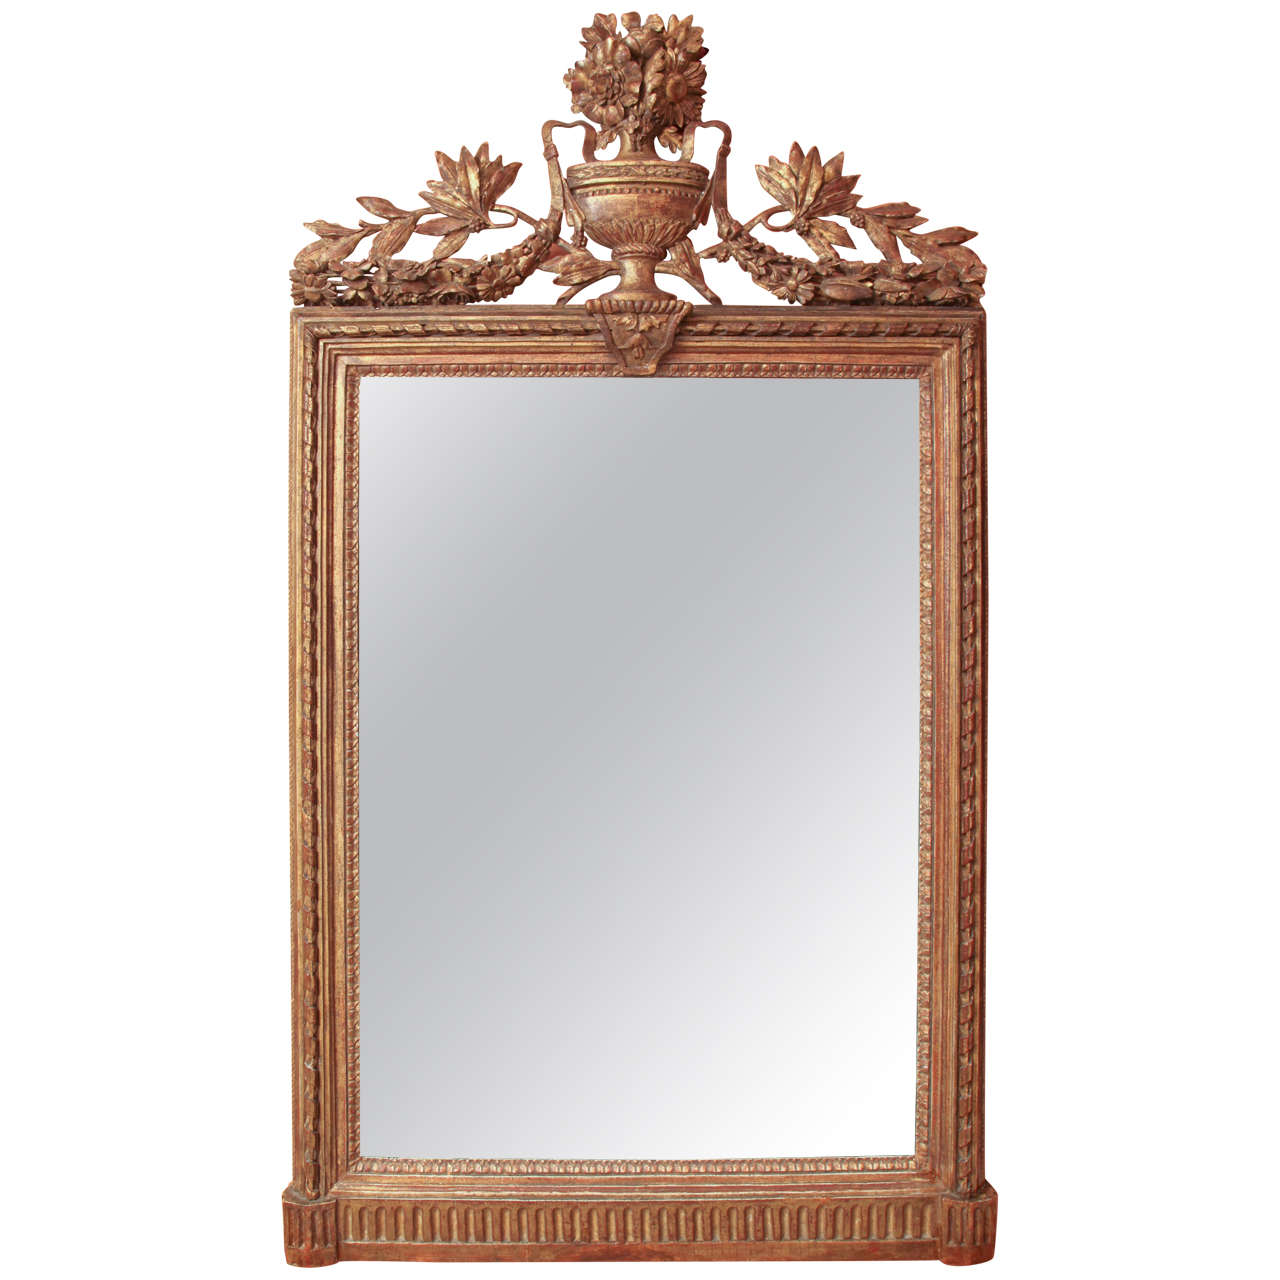 Louis XVI Console Mirror with Urn and Foliate Swagged Crest